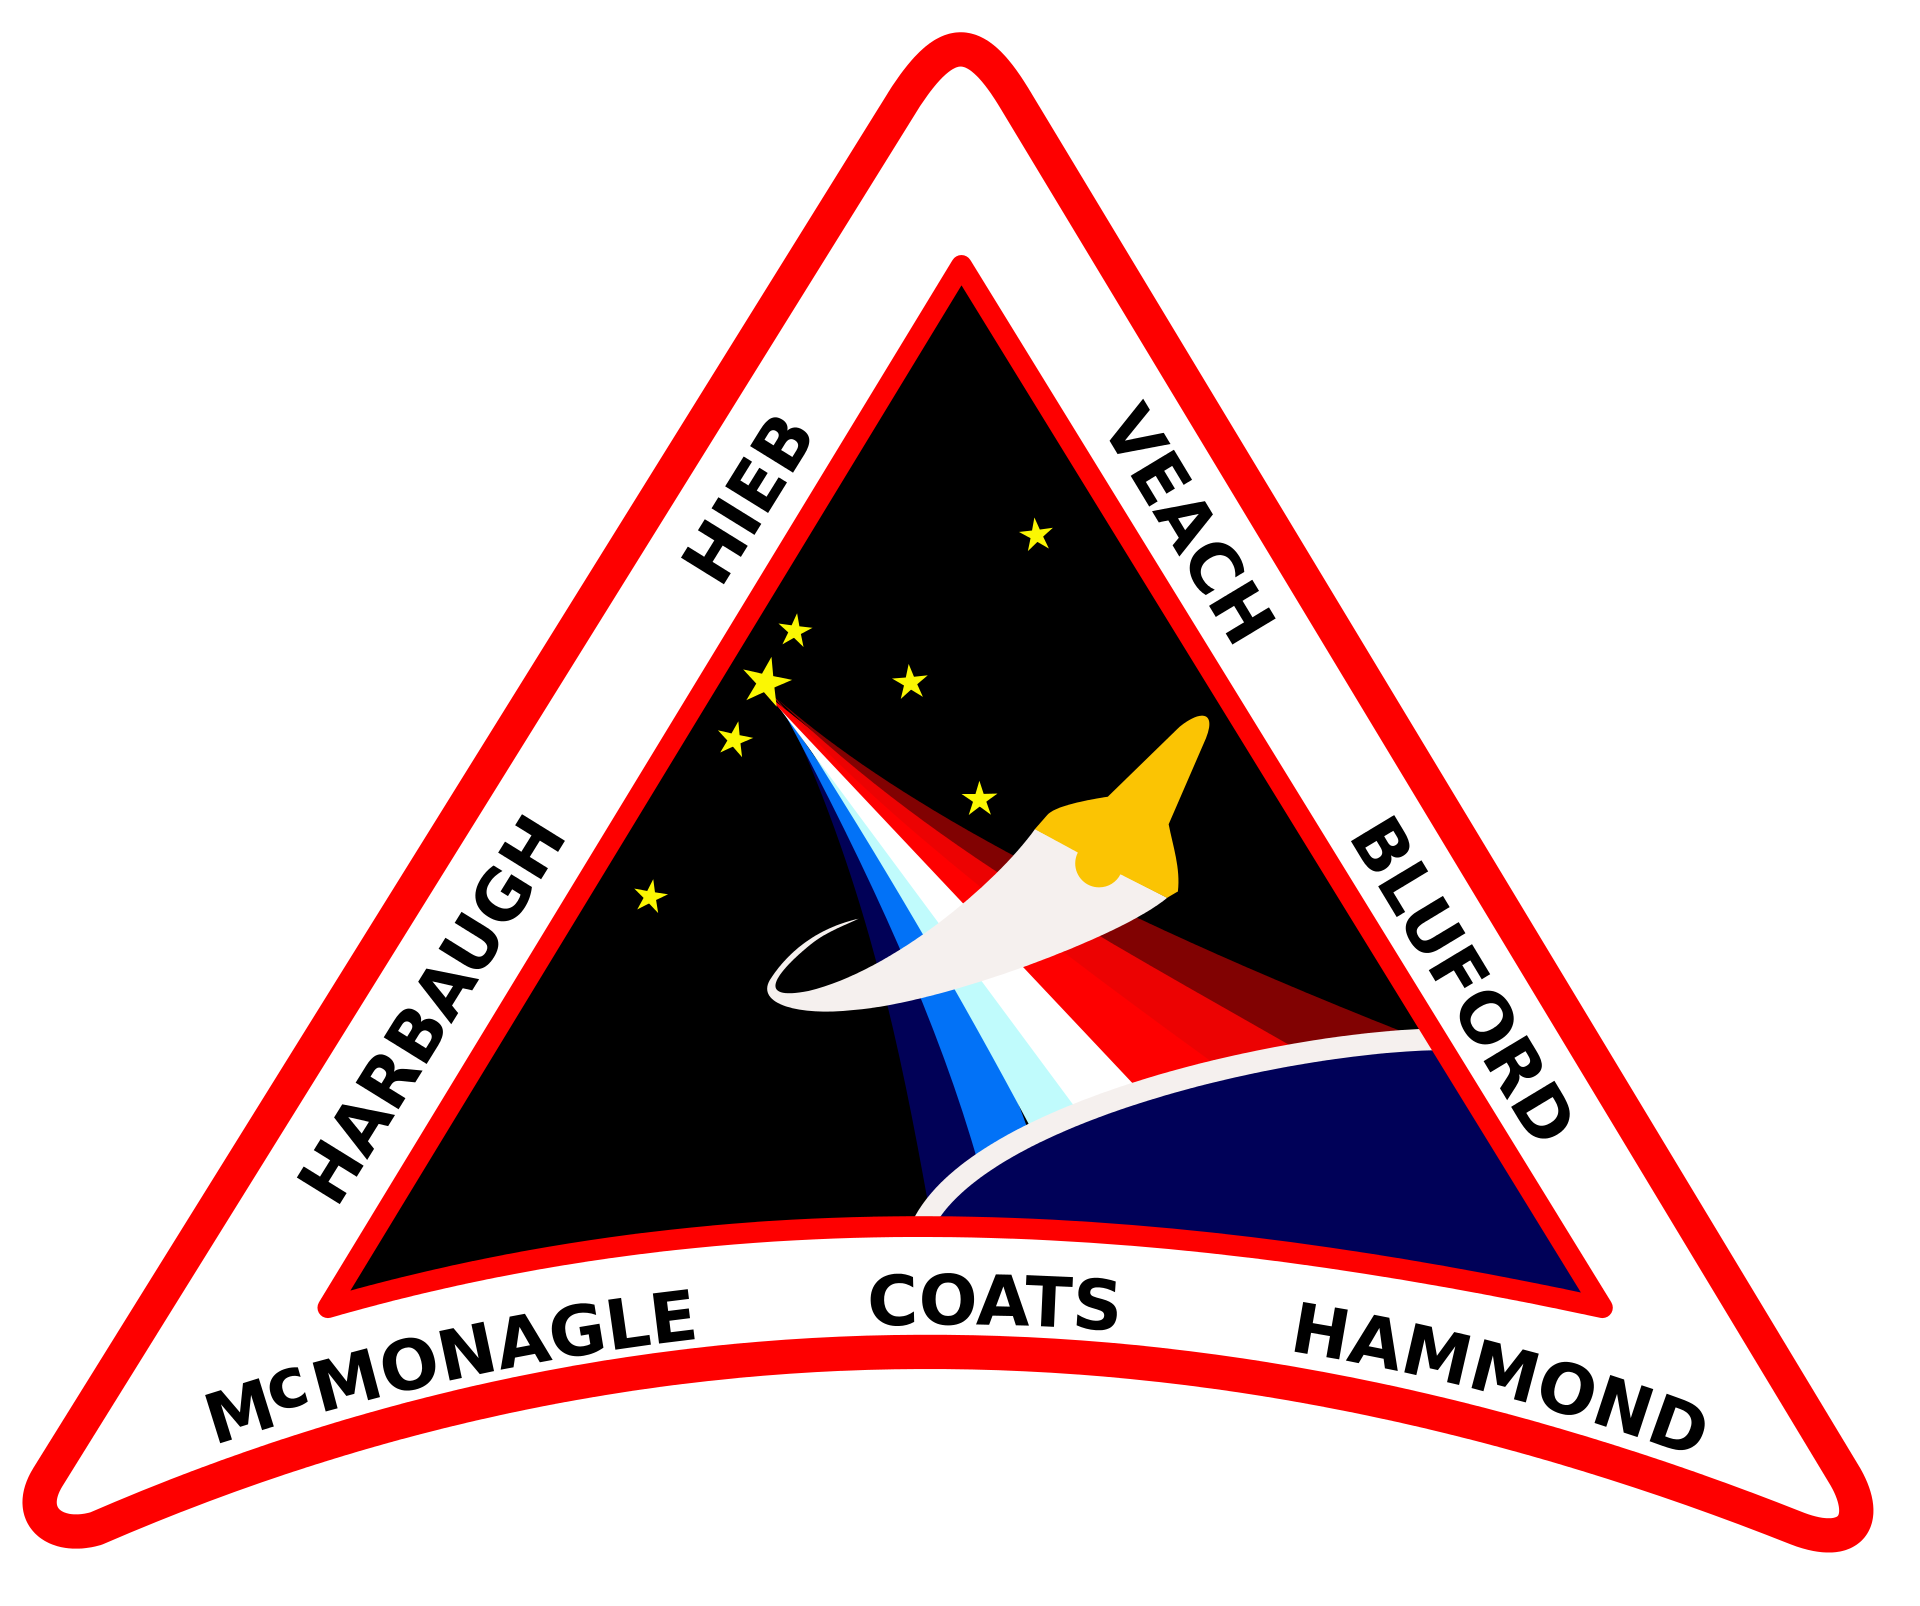 Mission patch for STS-39